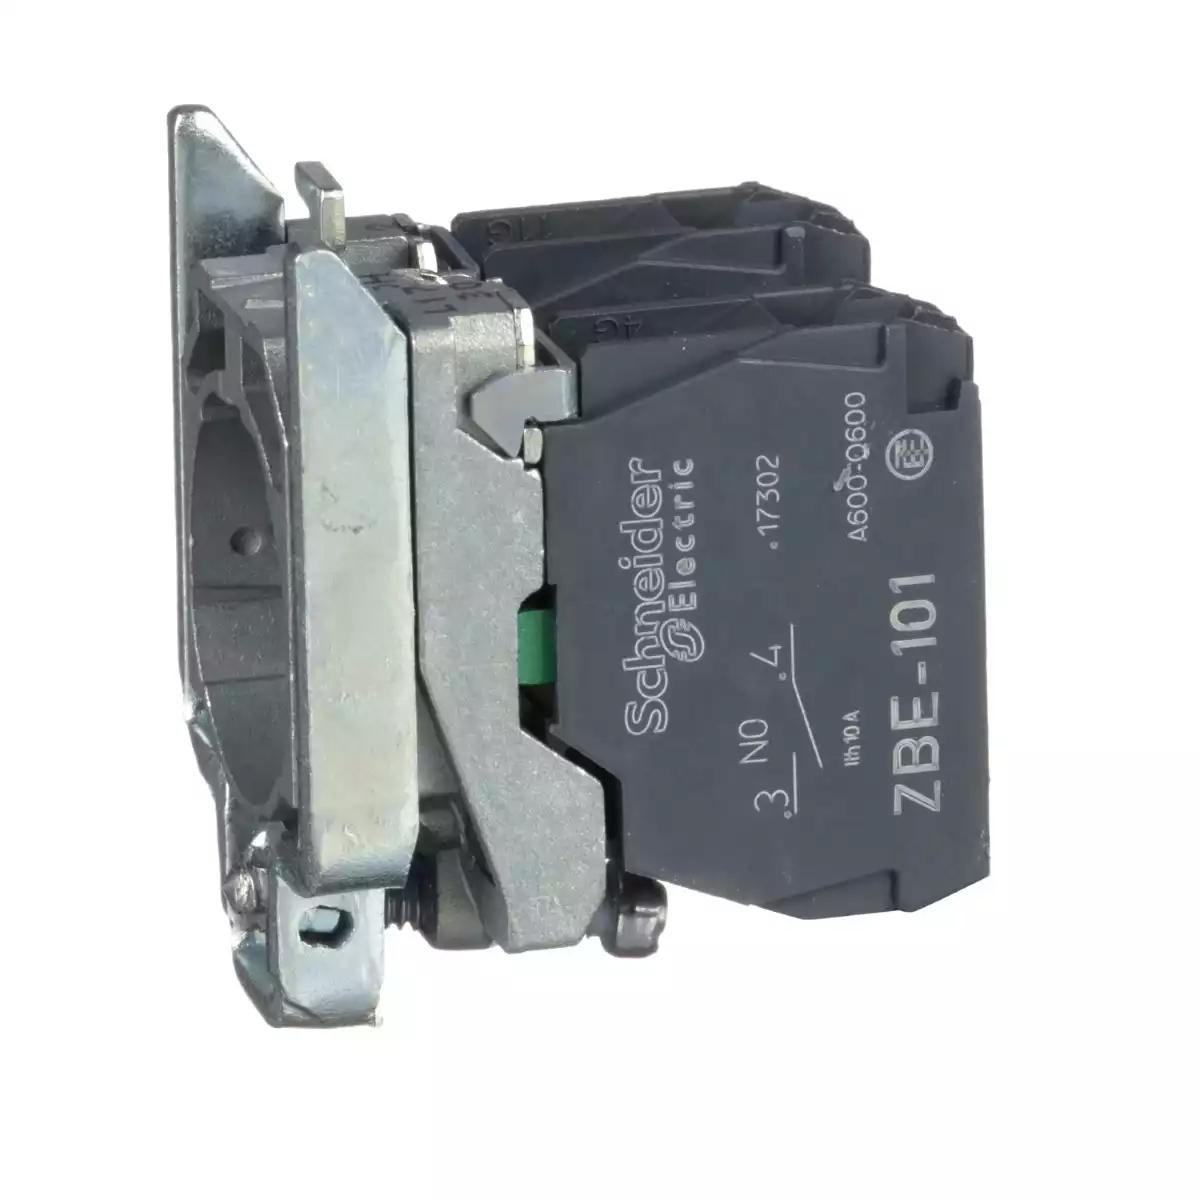 Schneider Electric Harmony XB4 single contact block with body/fixing collar 2NO screw clamp terminal